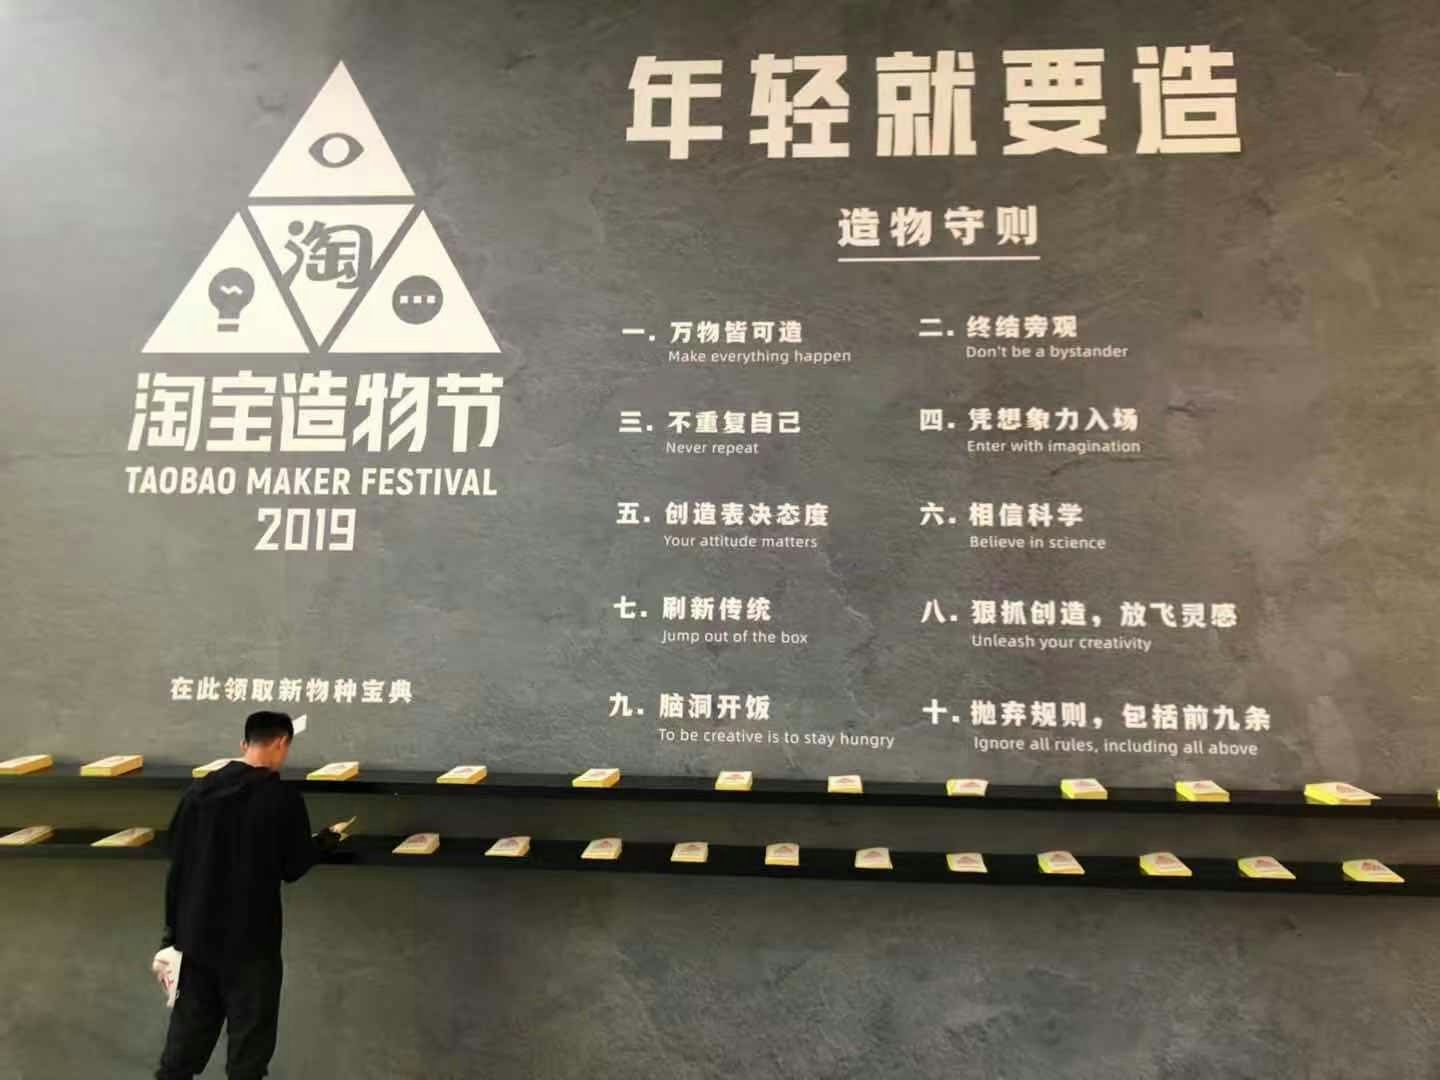 Upon entry, visitors are greeted with "rules" of the festival which showcased Gen-Z values. Photo: Ruonan Zheng/Jing Daily